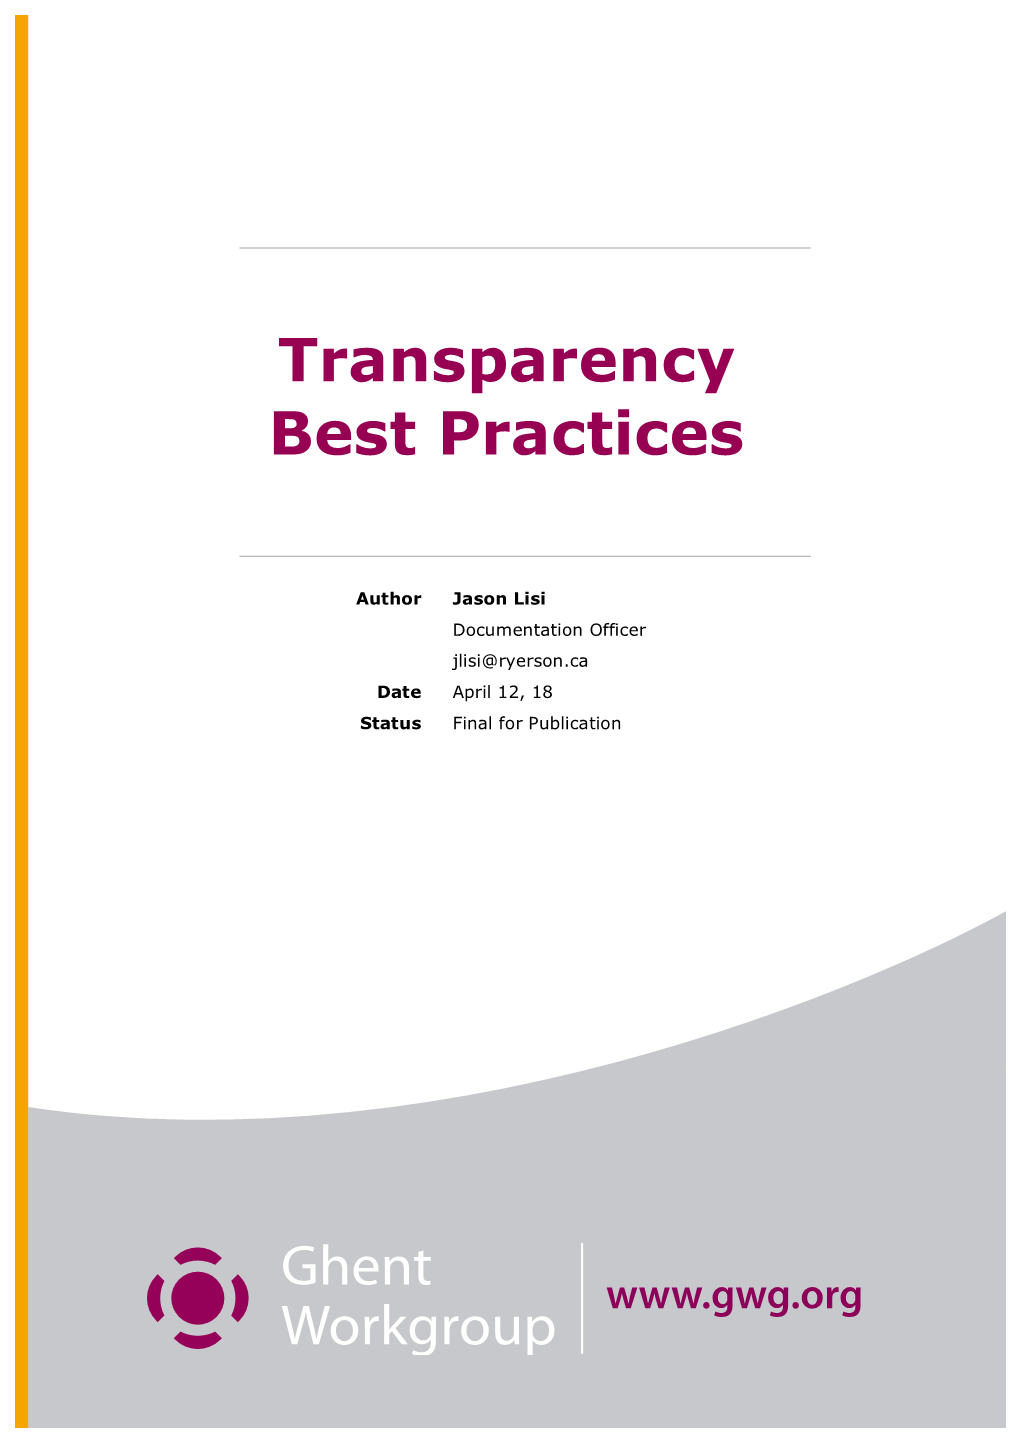 Transparency Best Practices